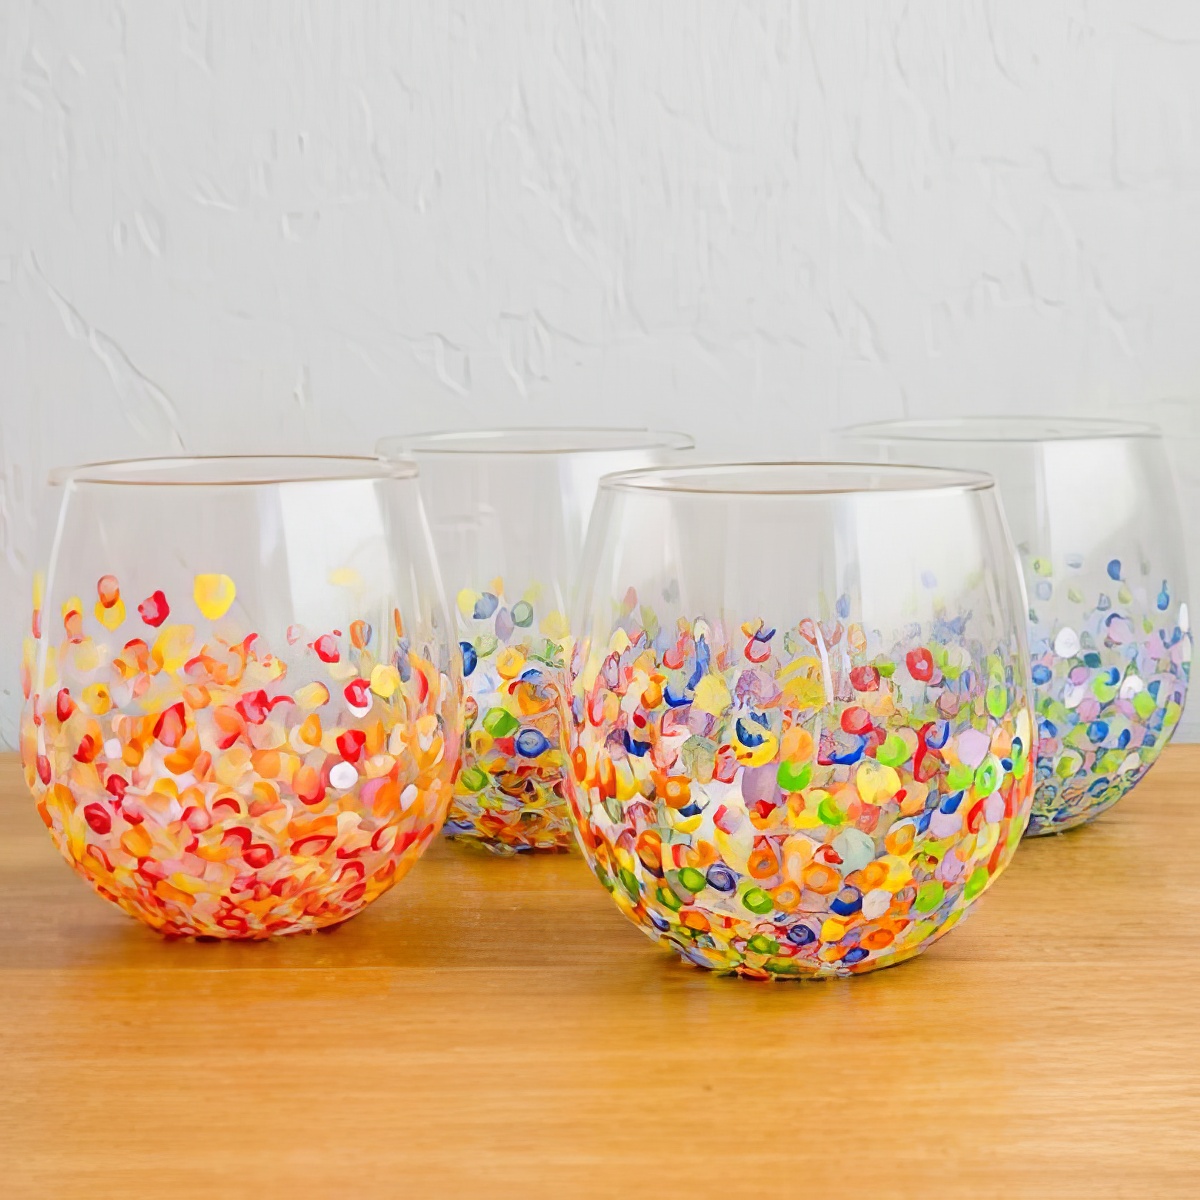 paint flowers in glass jars for colorful vases